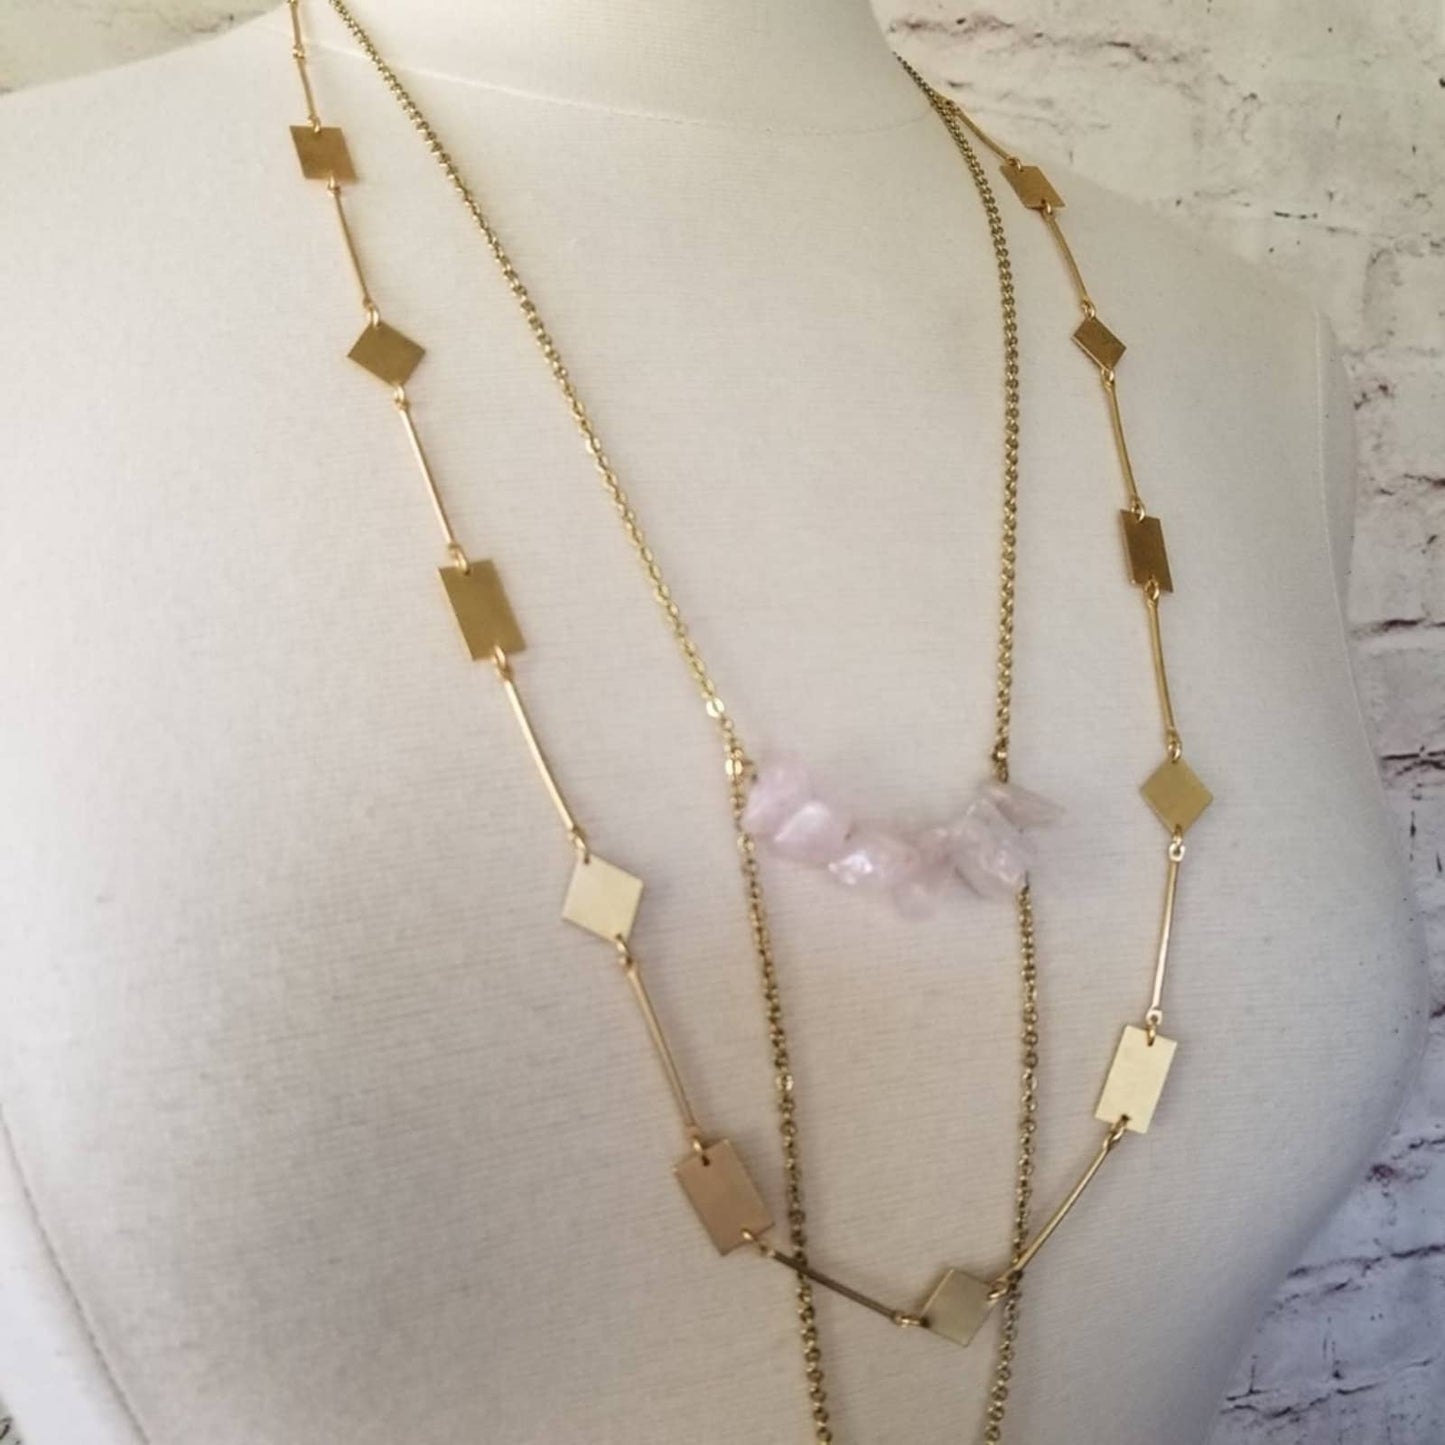 Gold Rose Quartz Stones and Cutout Shapes Layered Double Strand Chain Necklace